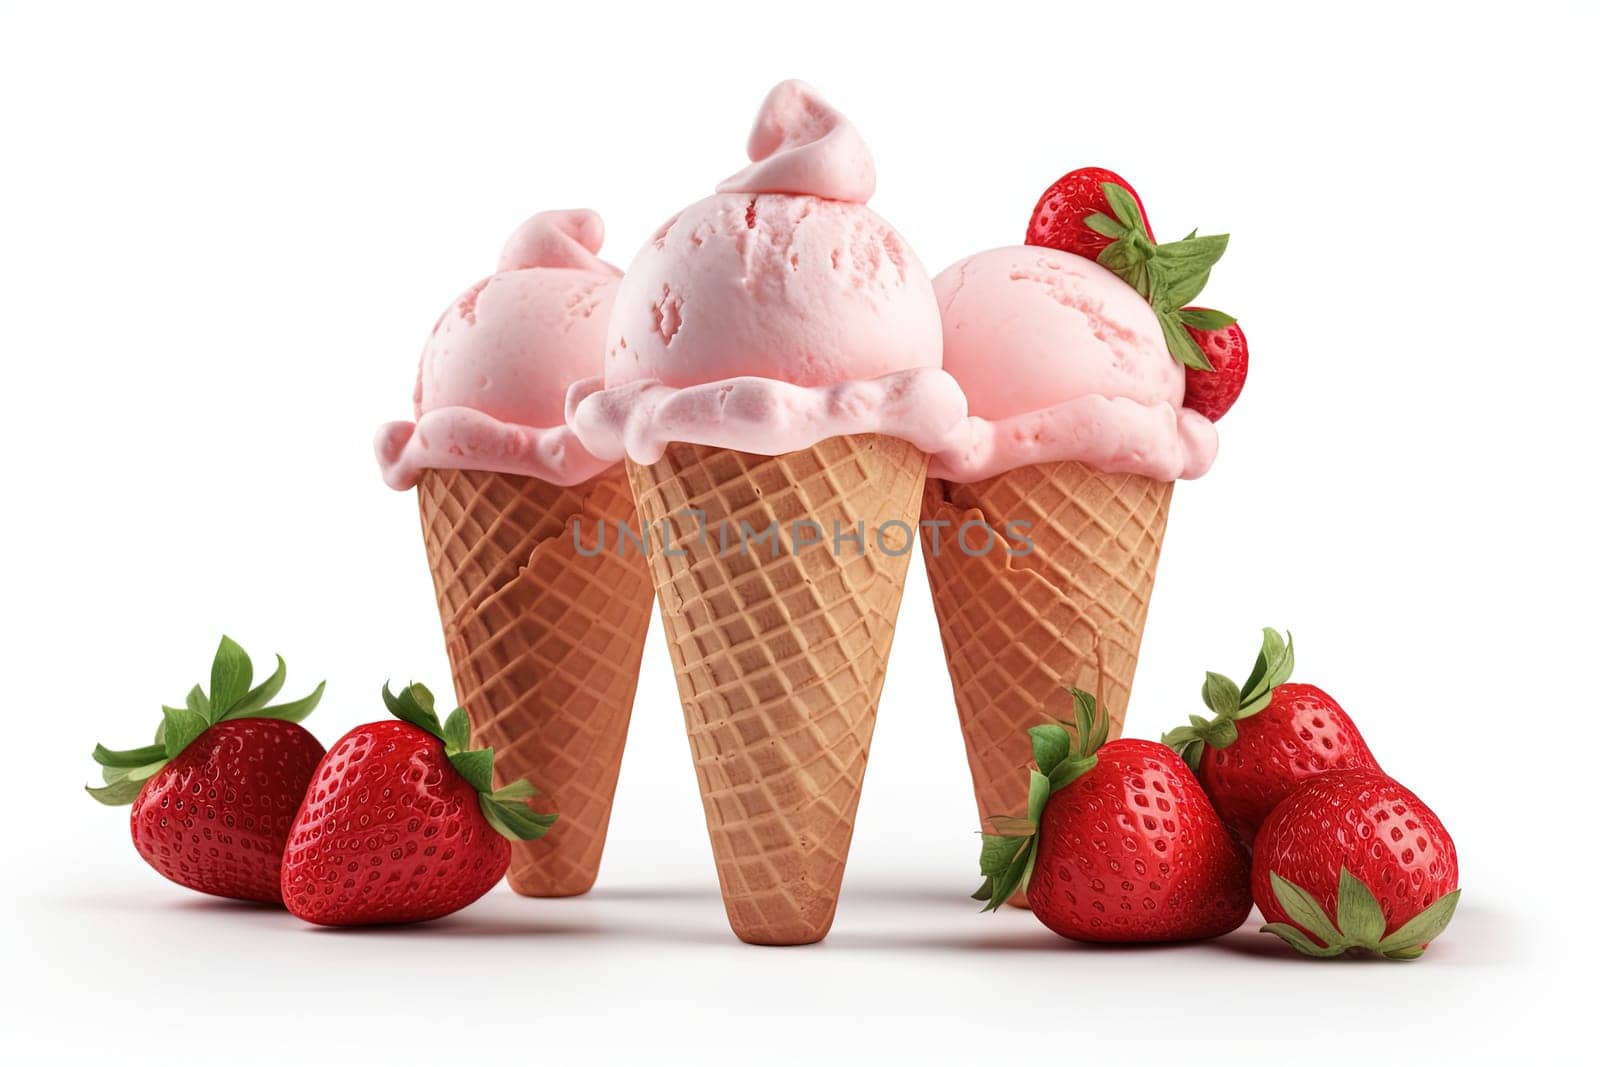 Ice cream with strawberries isolated on a white background, 3d render by GekaSkr